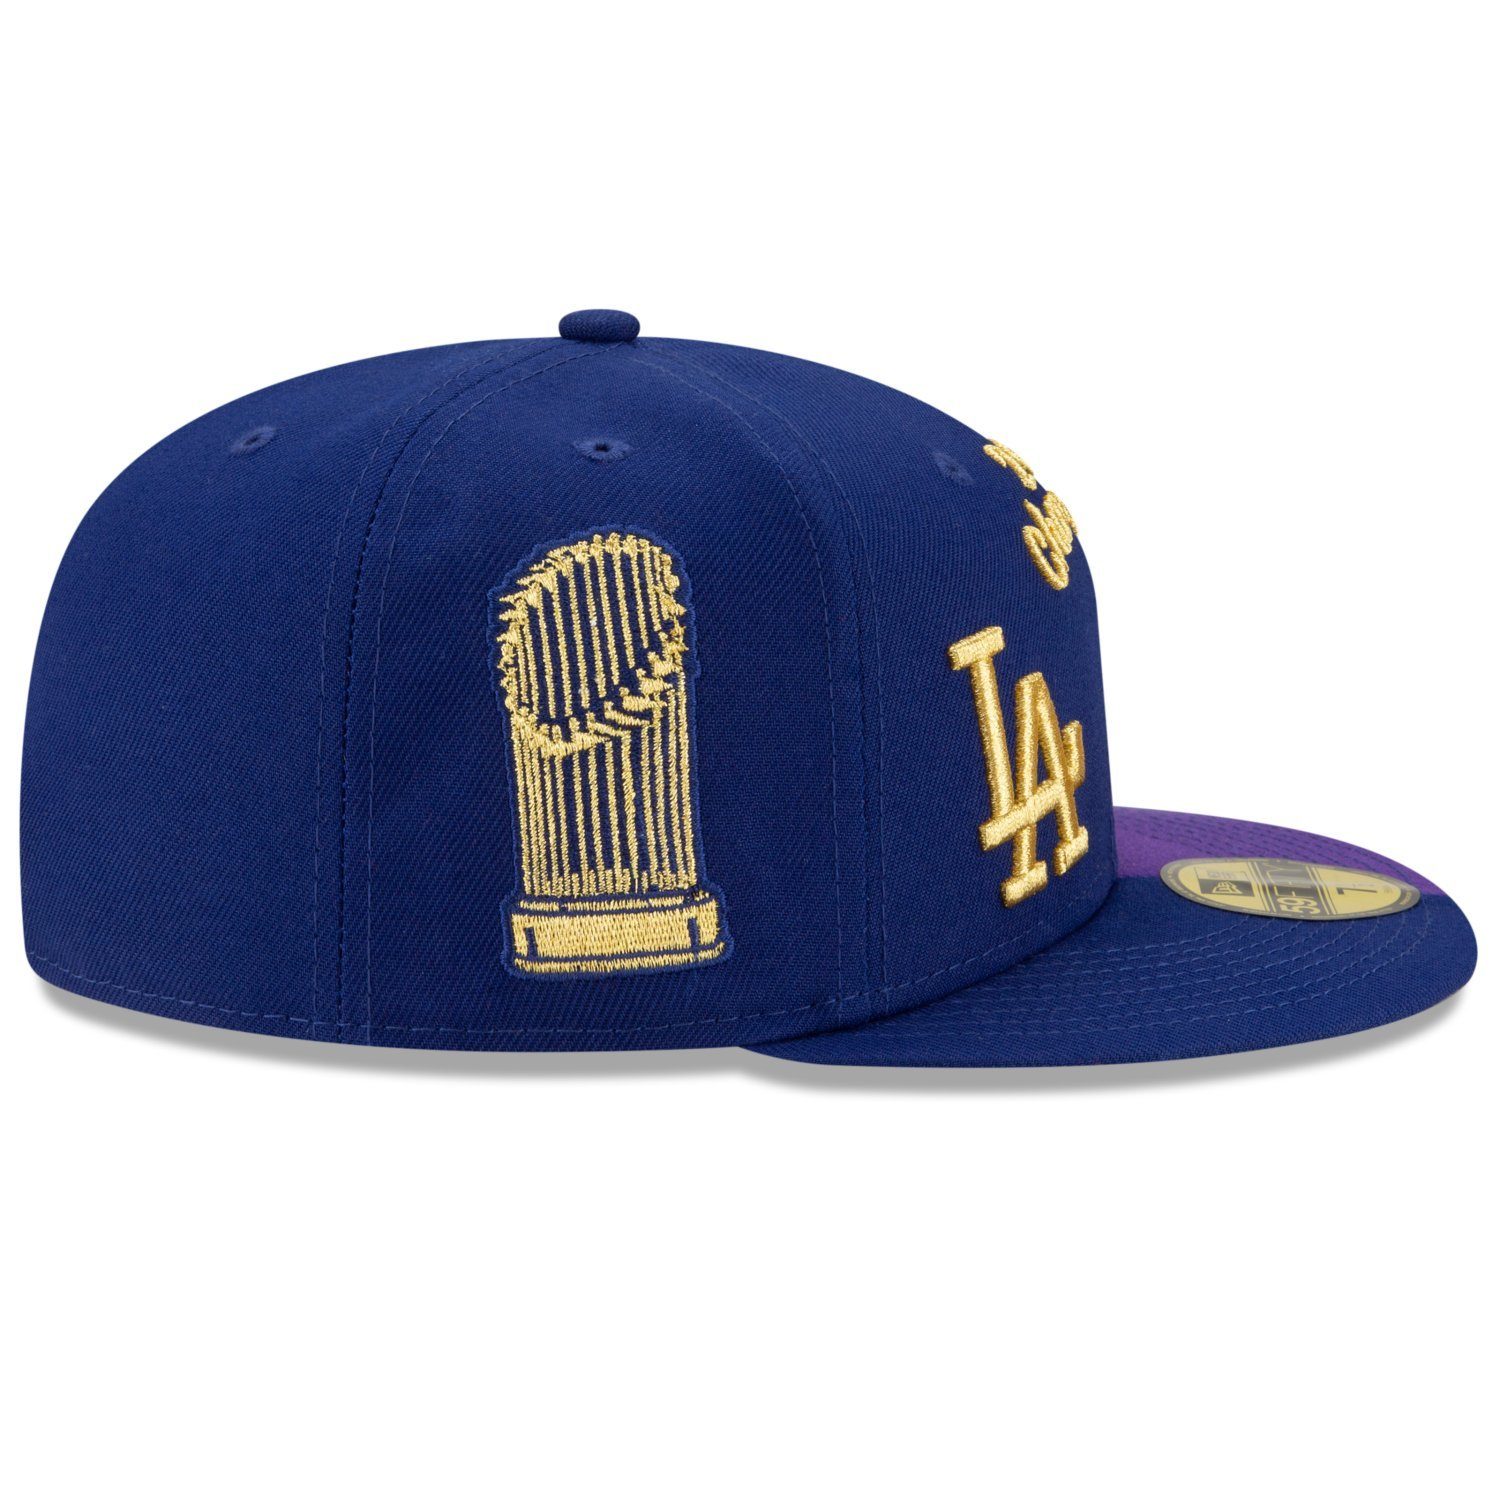 Fitted Dodgers 2020 New Cap & Lakers Era LA 59Fifty CHAMPS